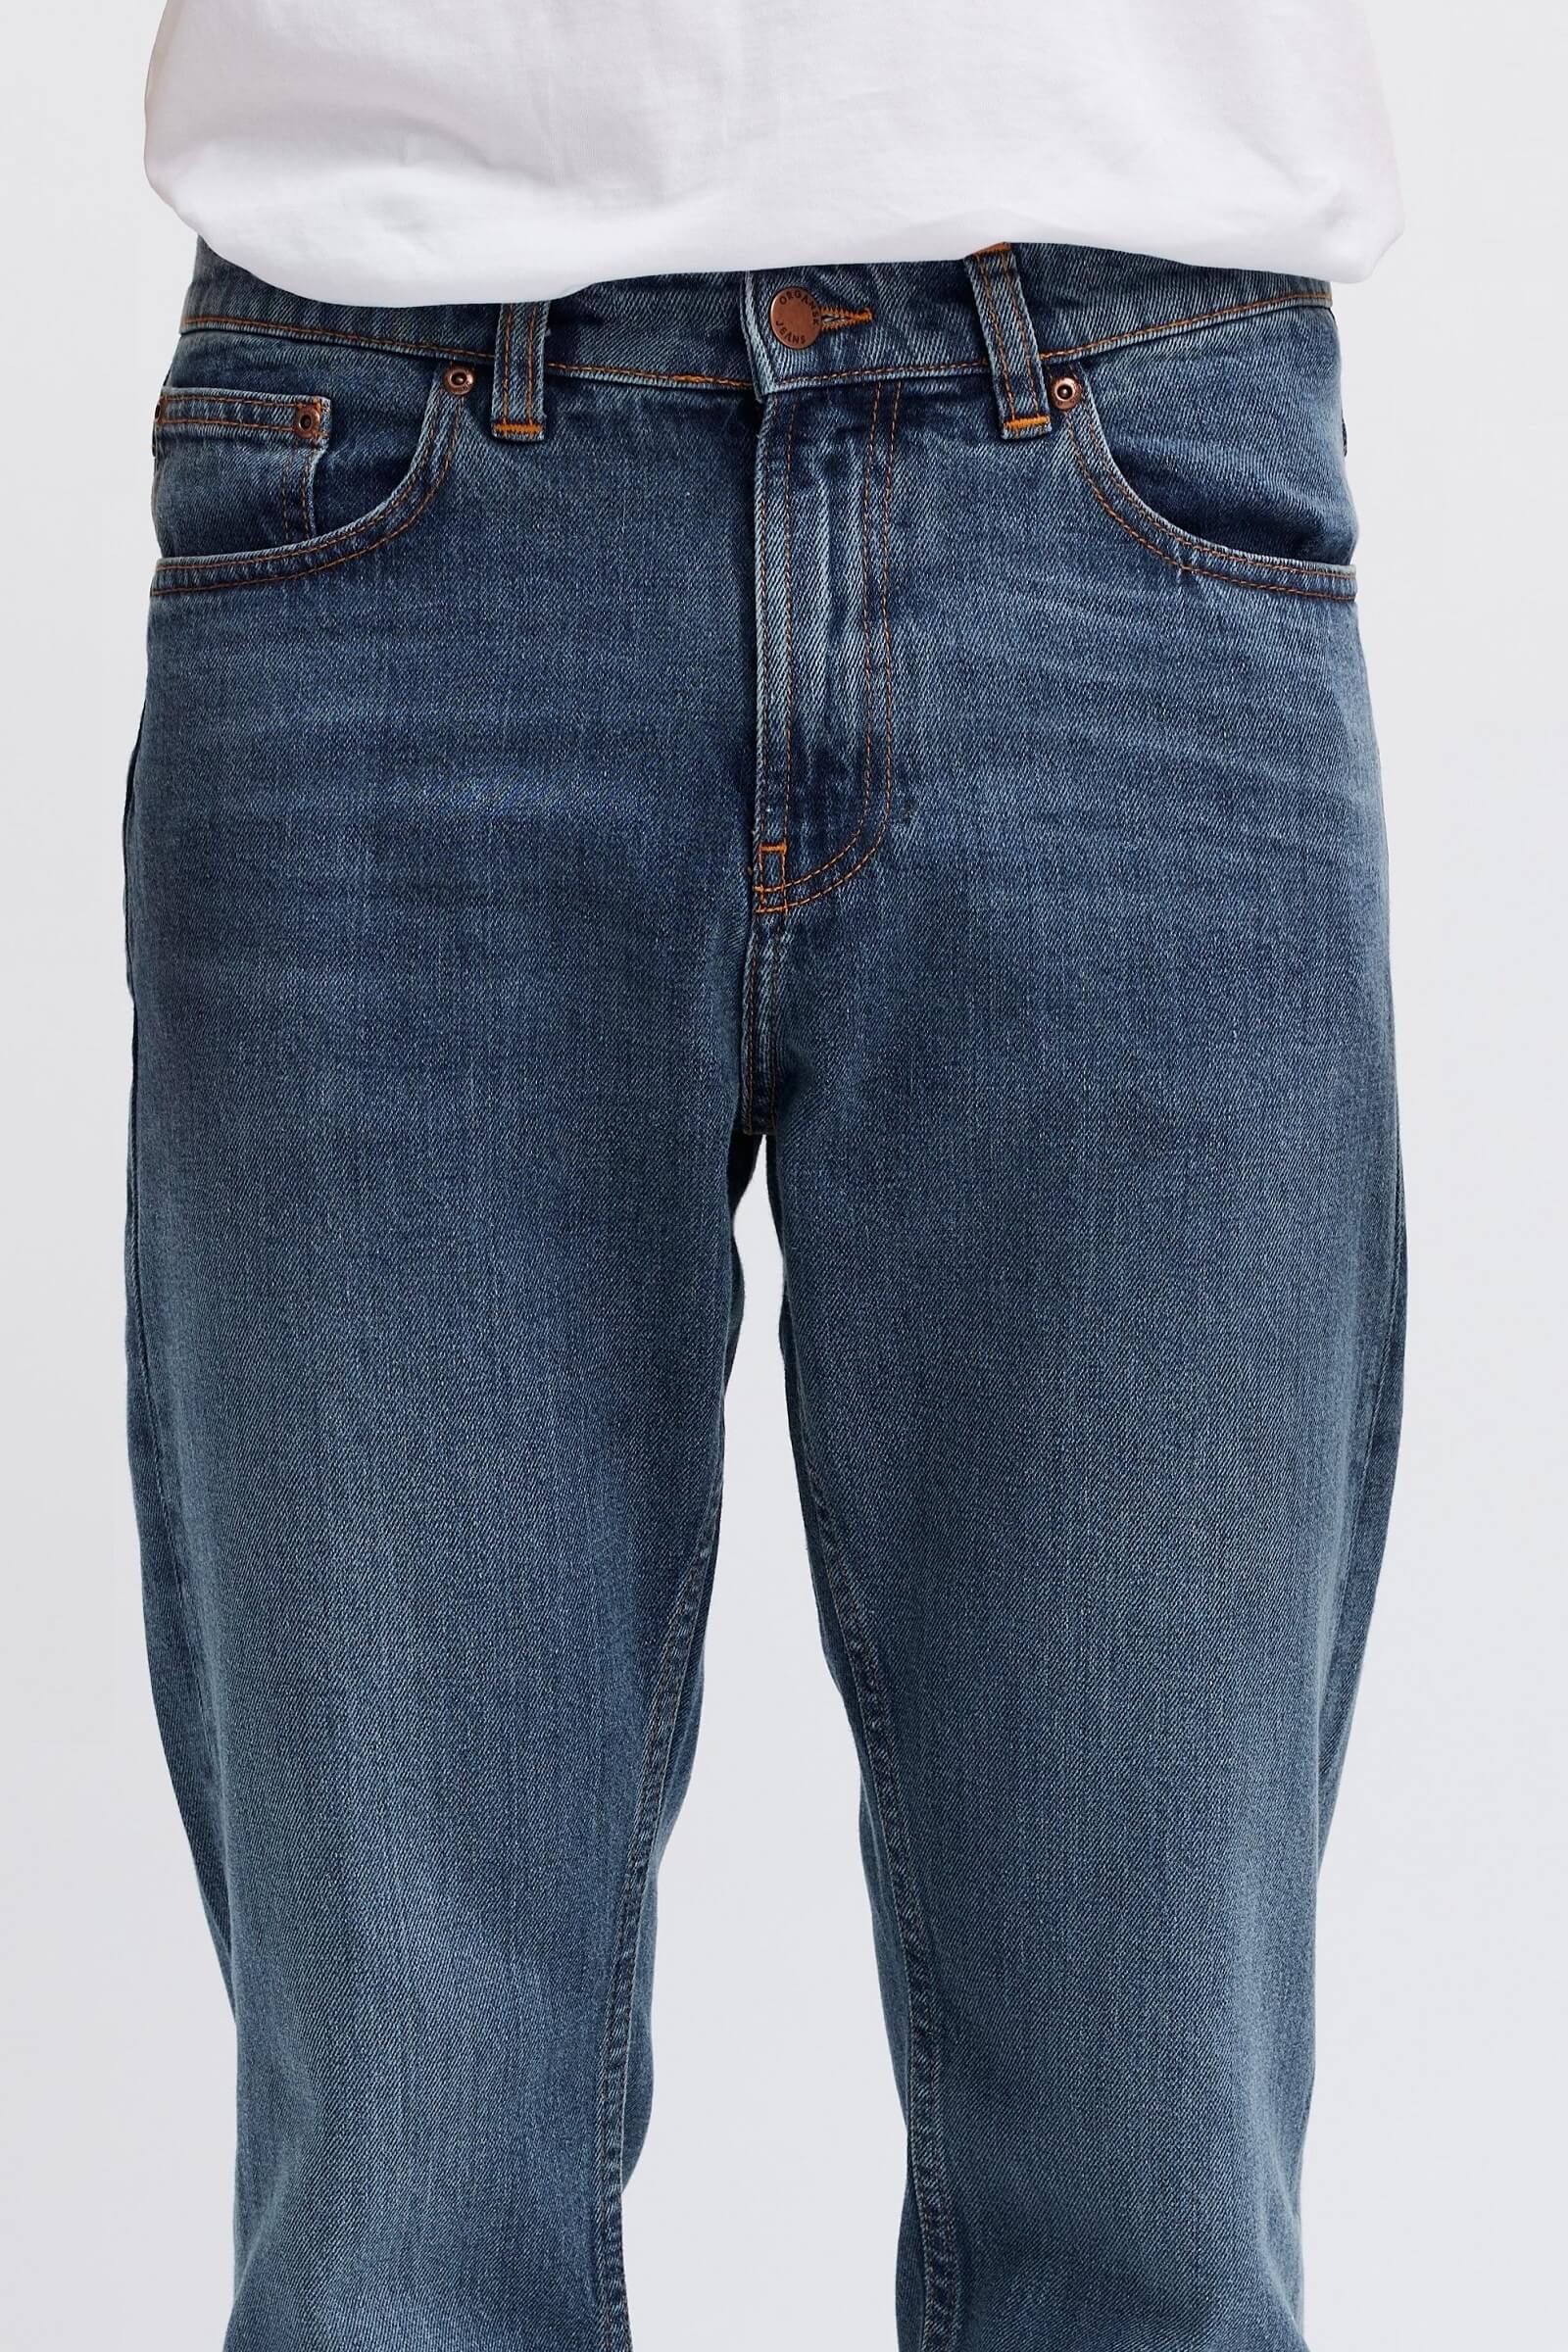 Sustainable jeans for men